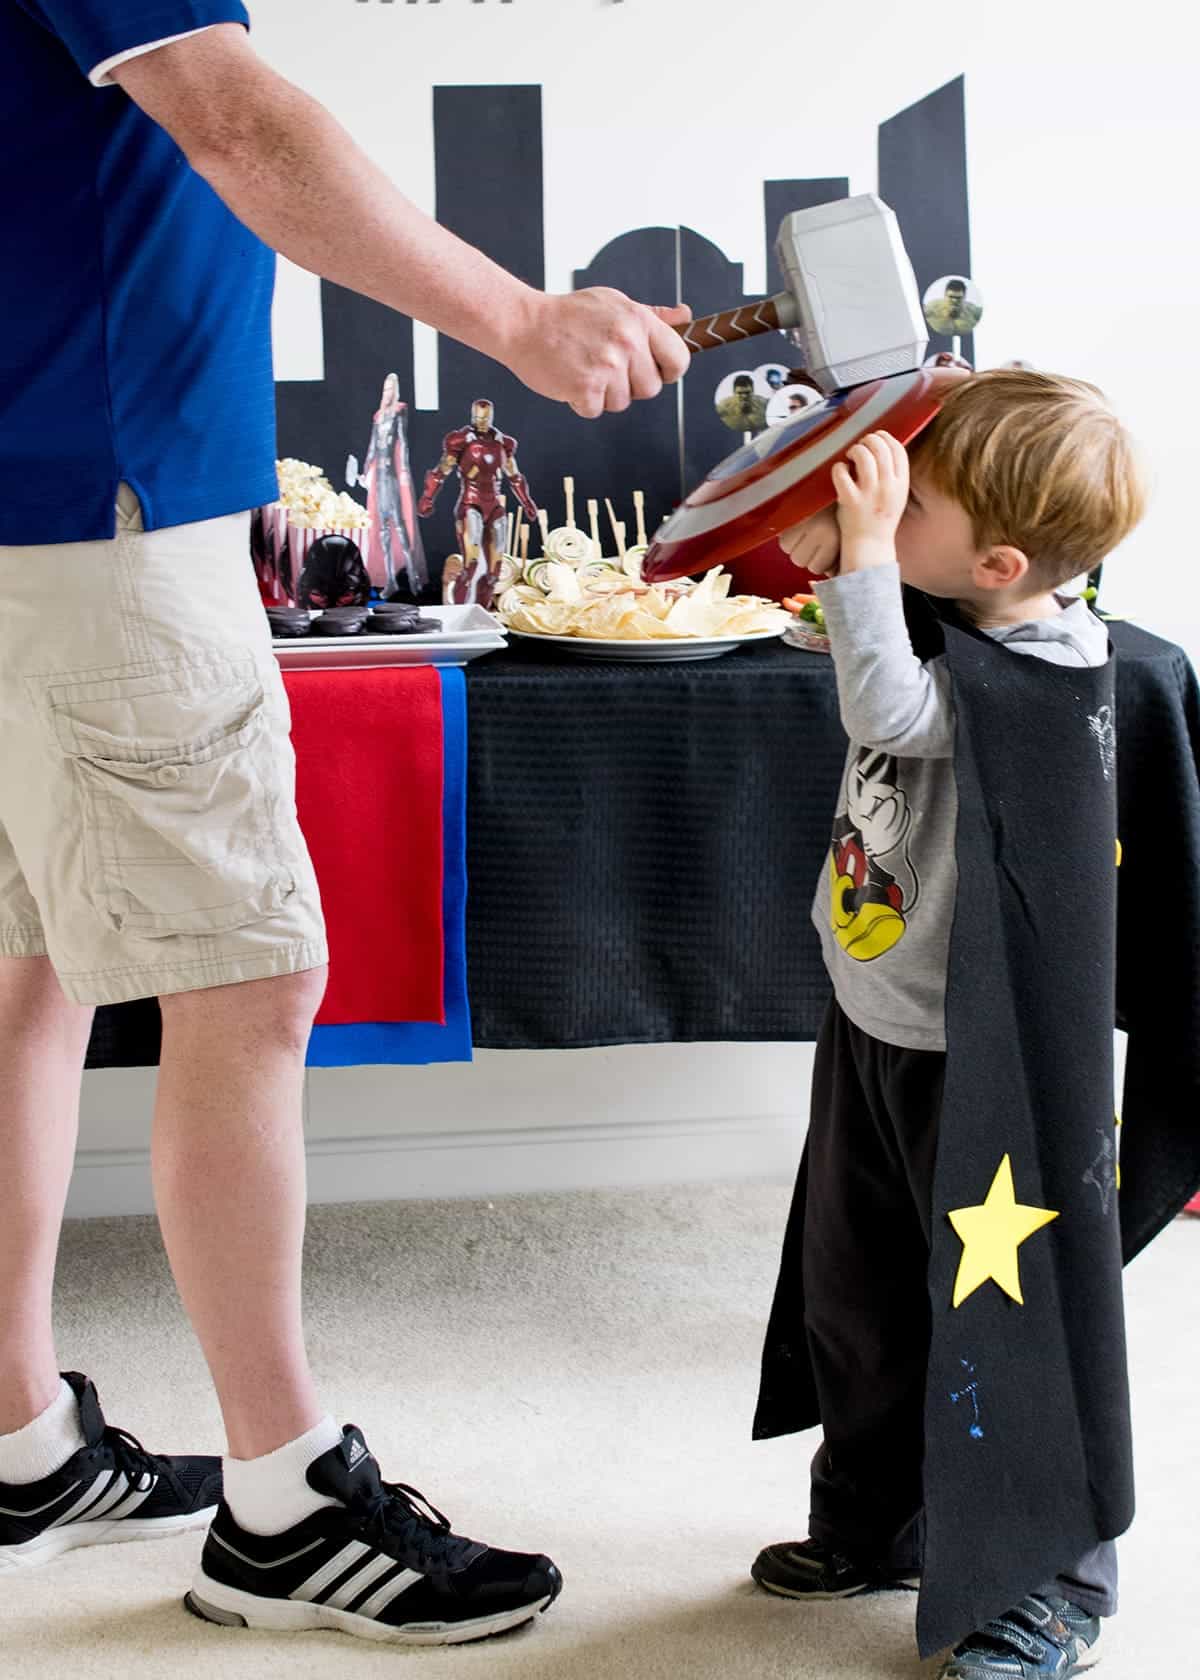 Dad and son in black cape in front of Avengers themed party table, playing with toys. 